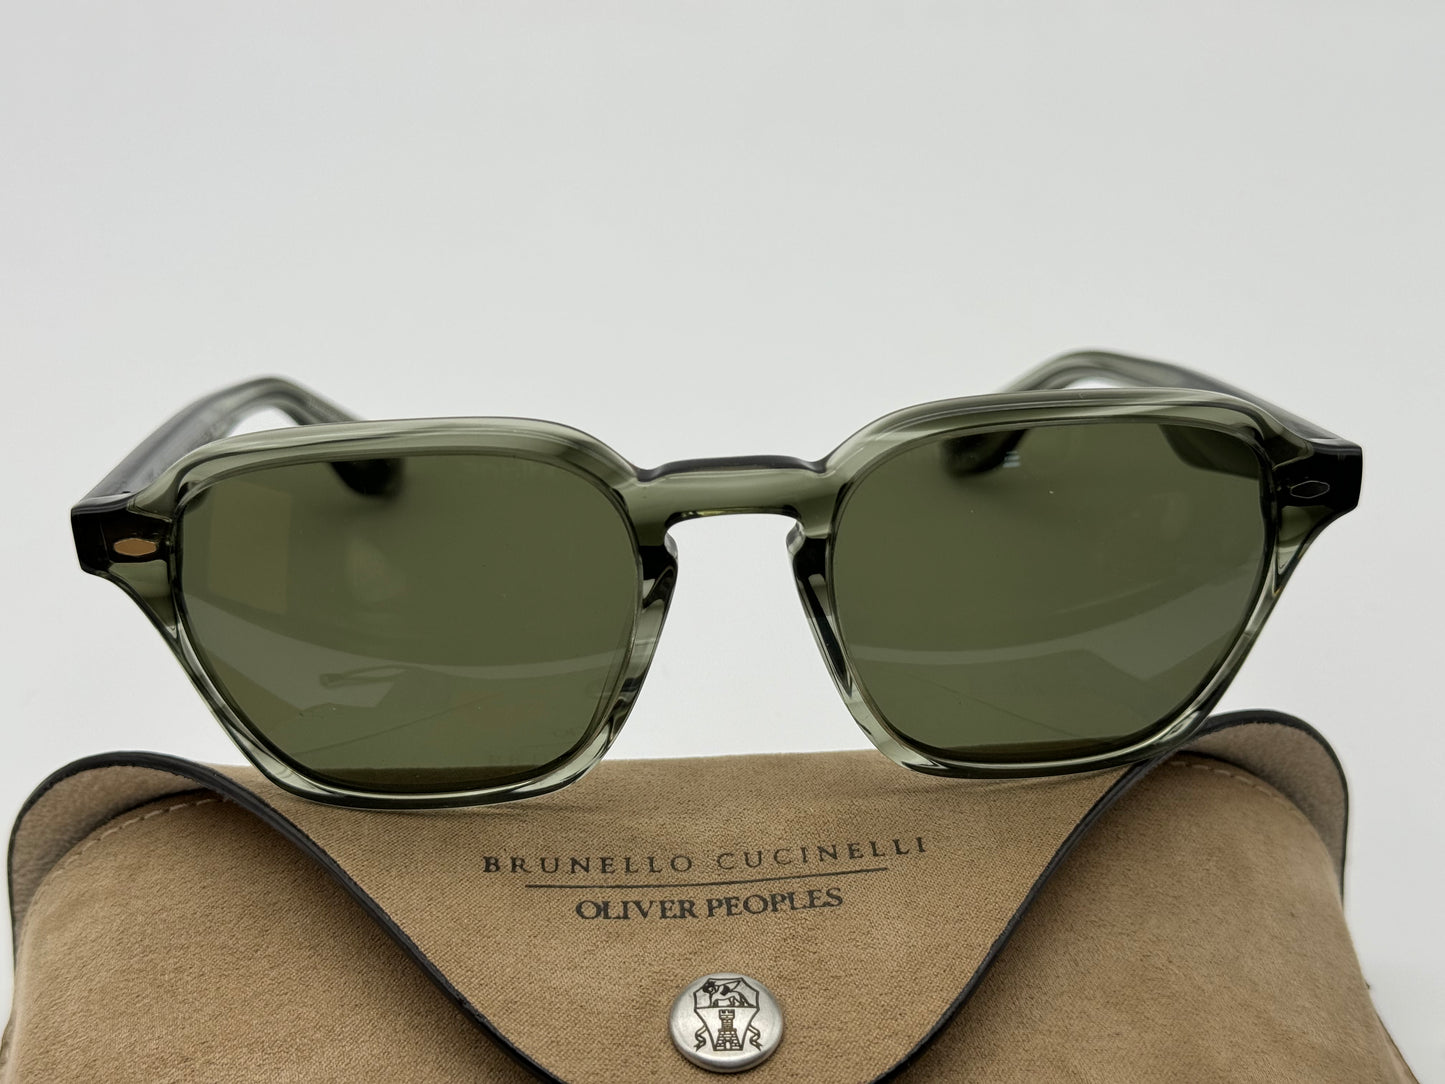 Oliver Peoples Brunello Cucinelli Griffo OV 5499 SU Washed Jade G-15 170552 Italy NEW